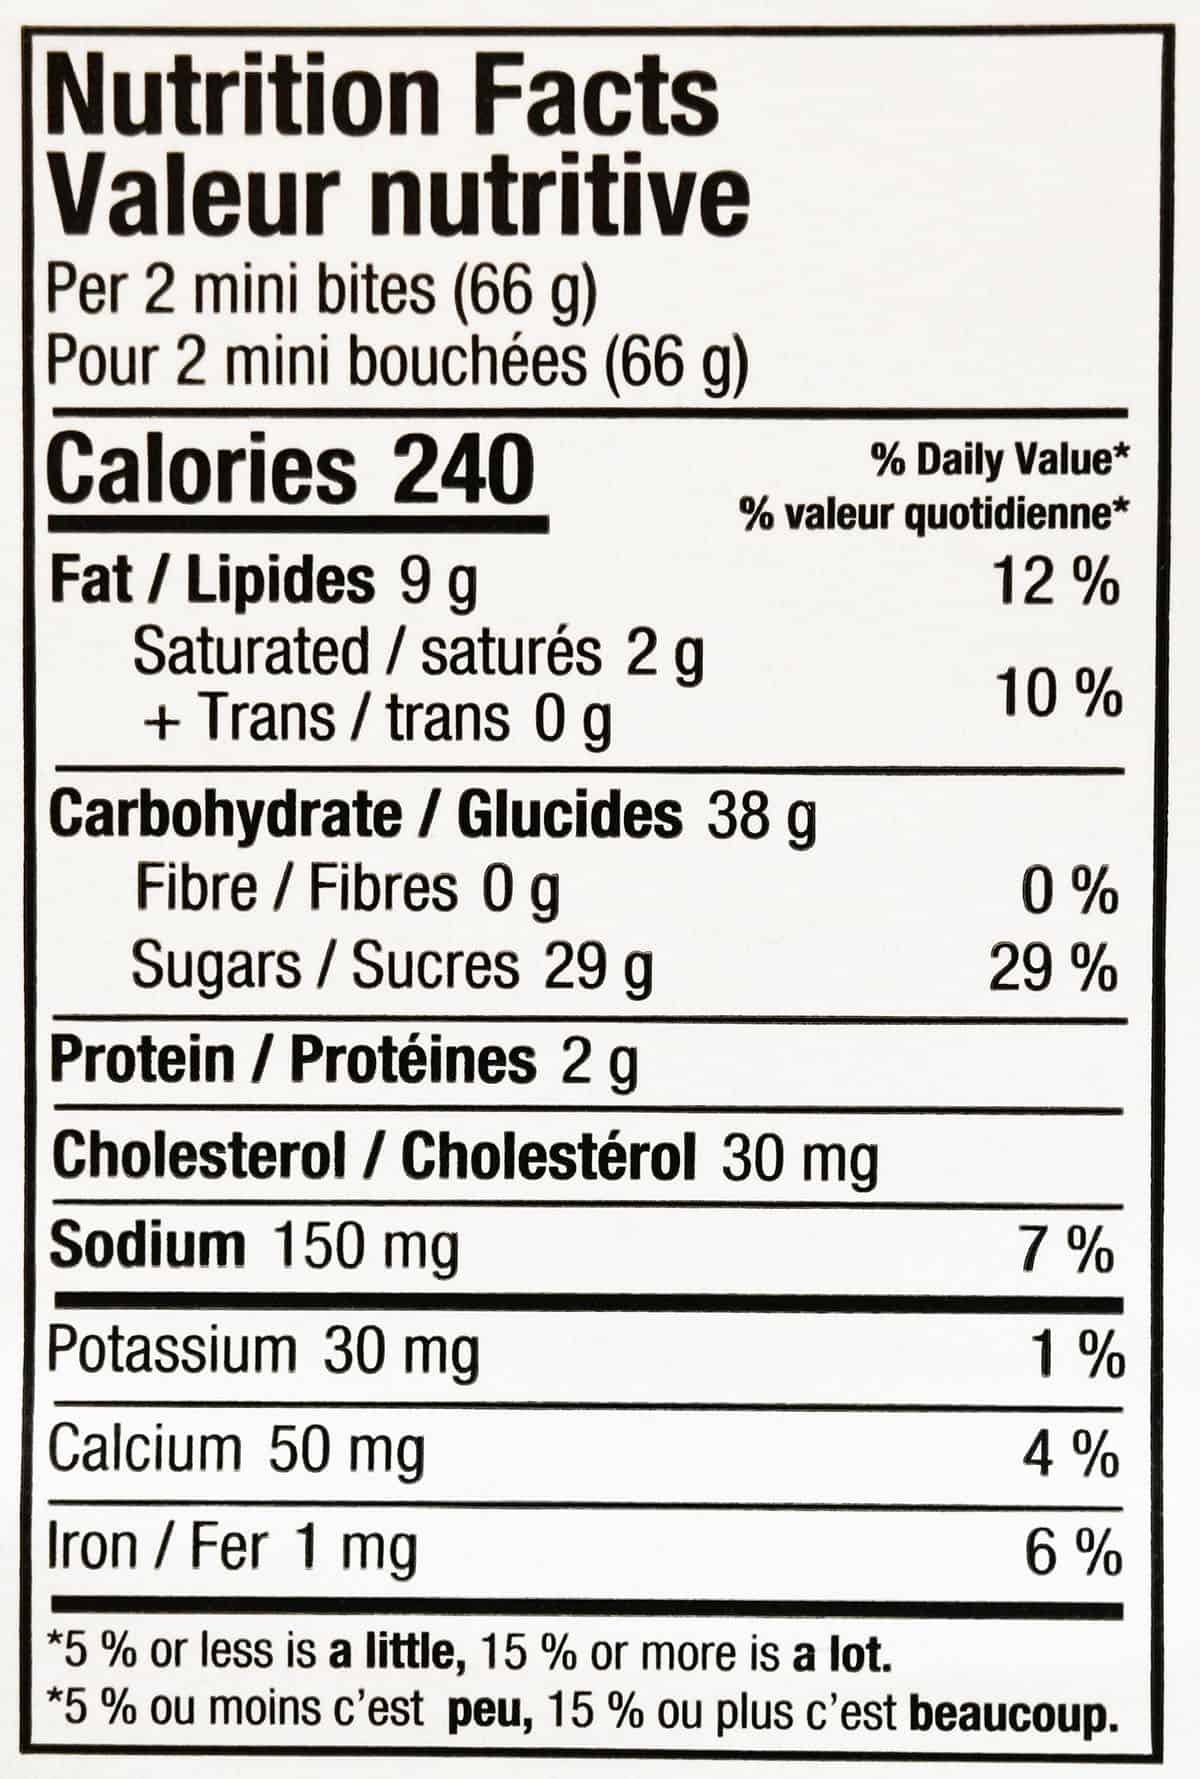 Nutrition facts from package label.